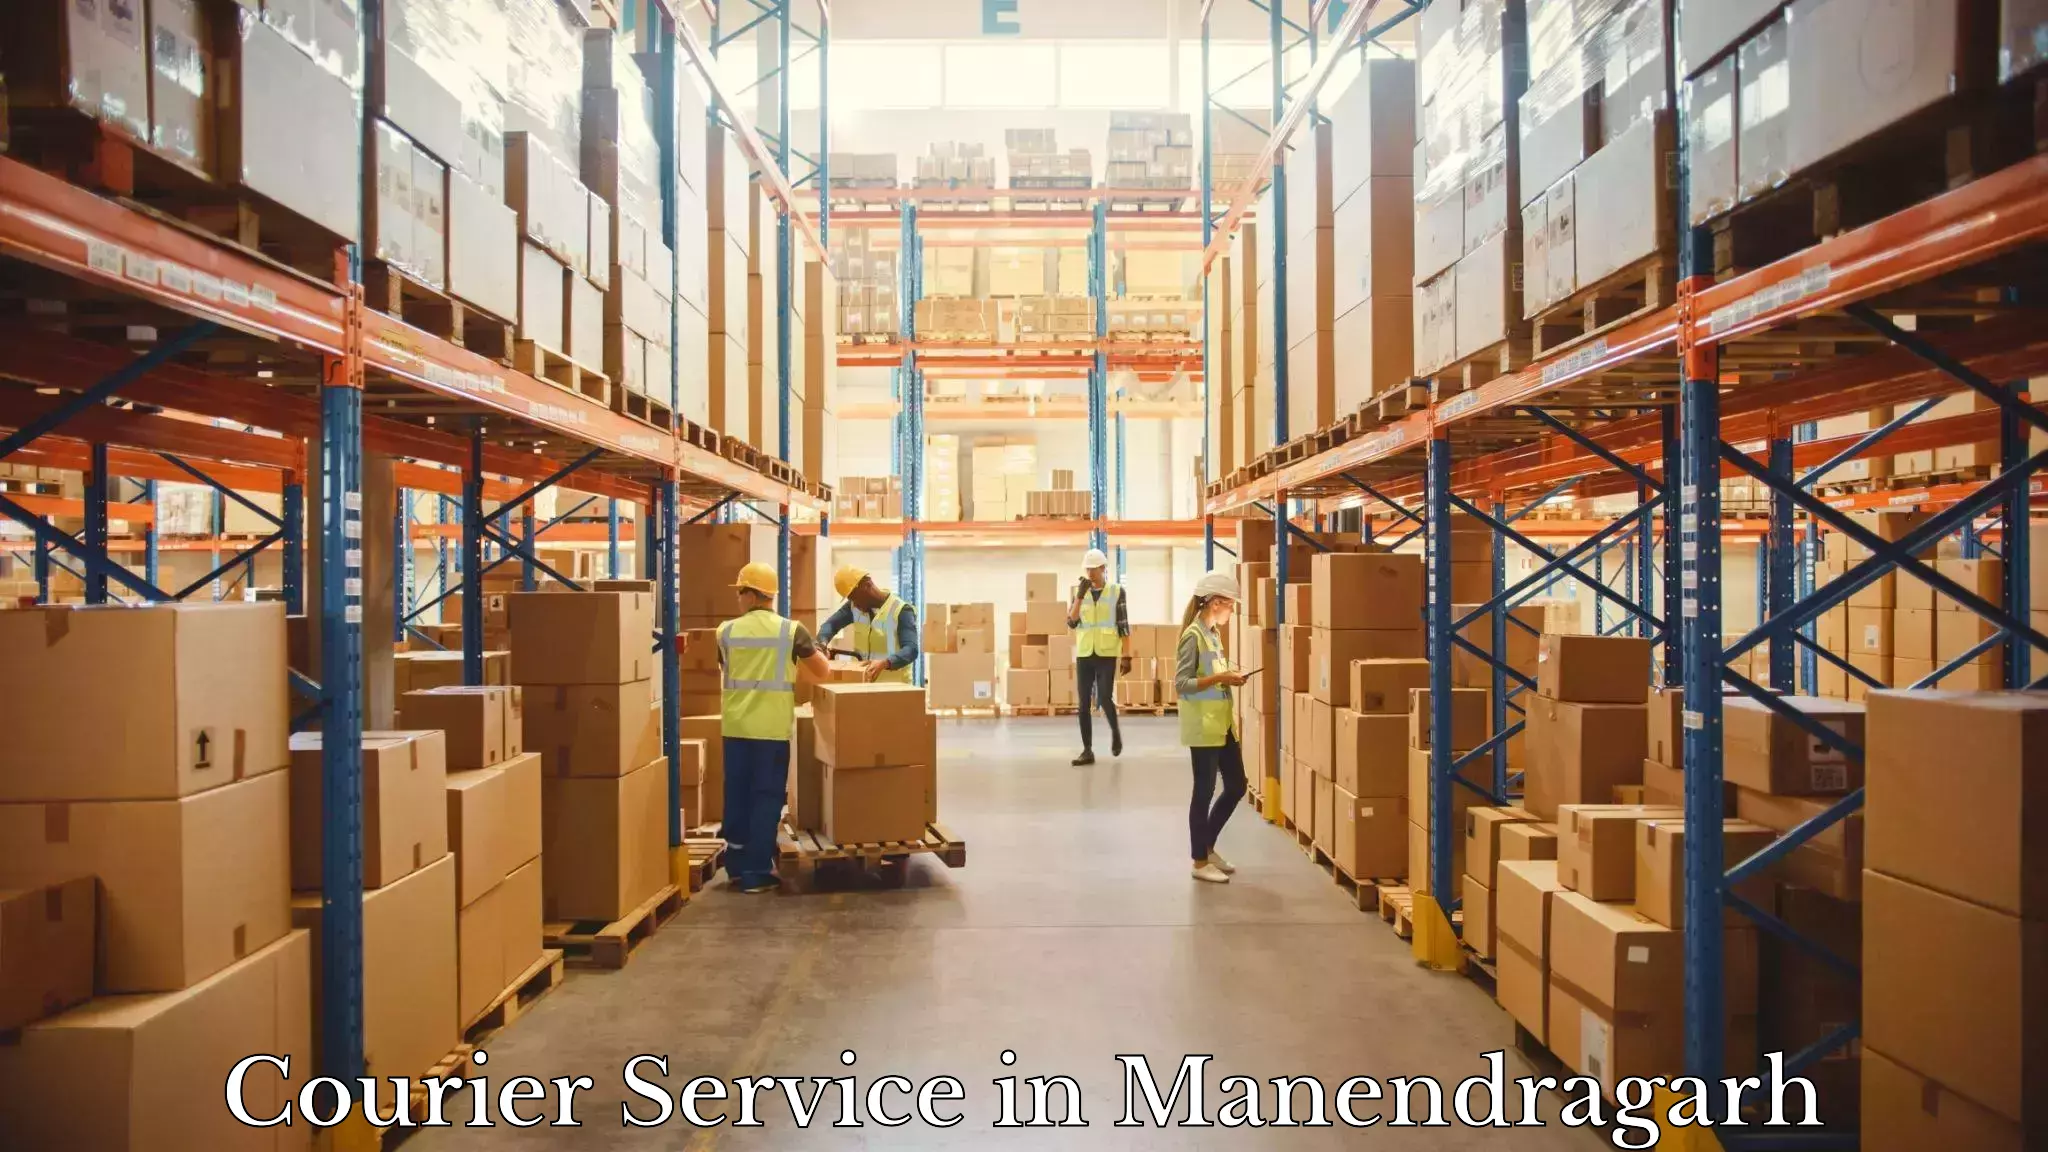 On-demand shipping options in Manendragarh